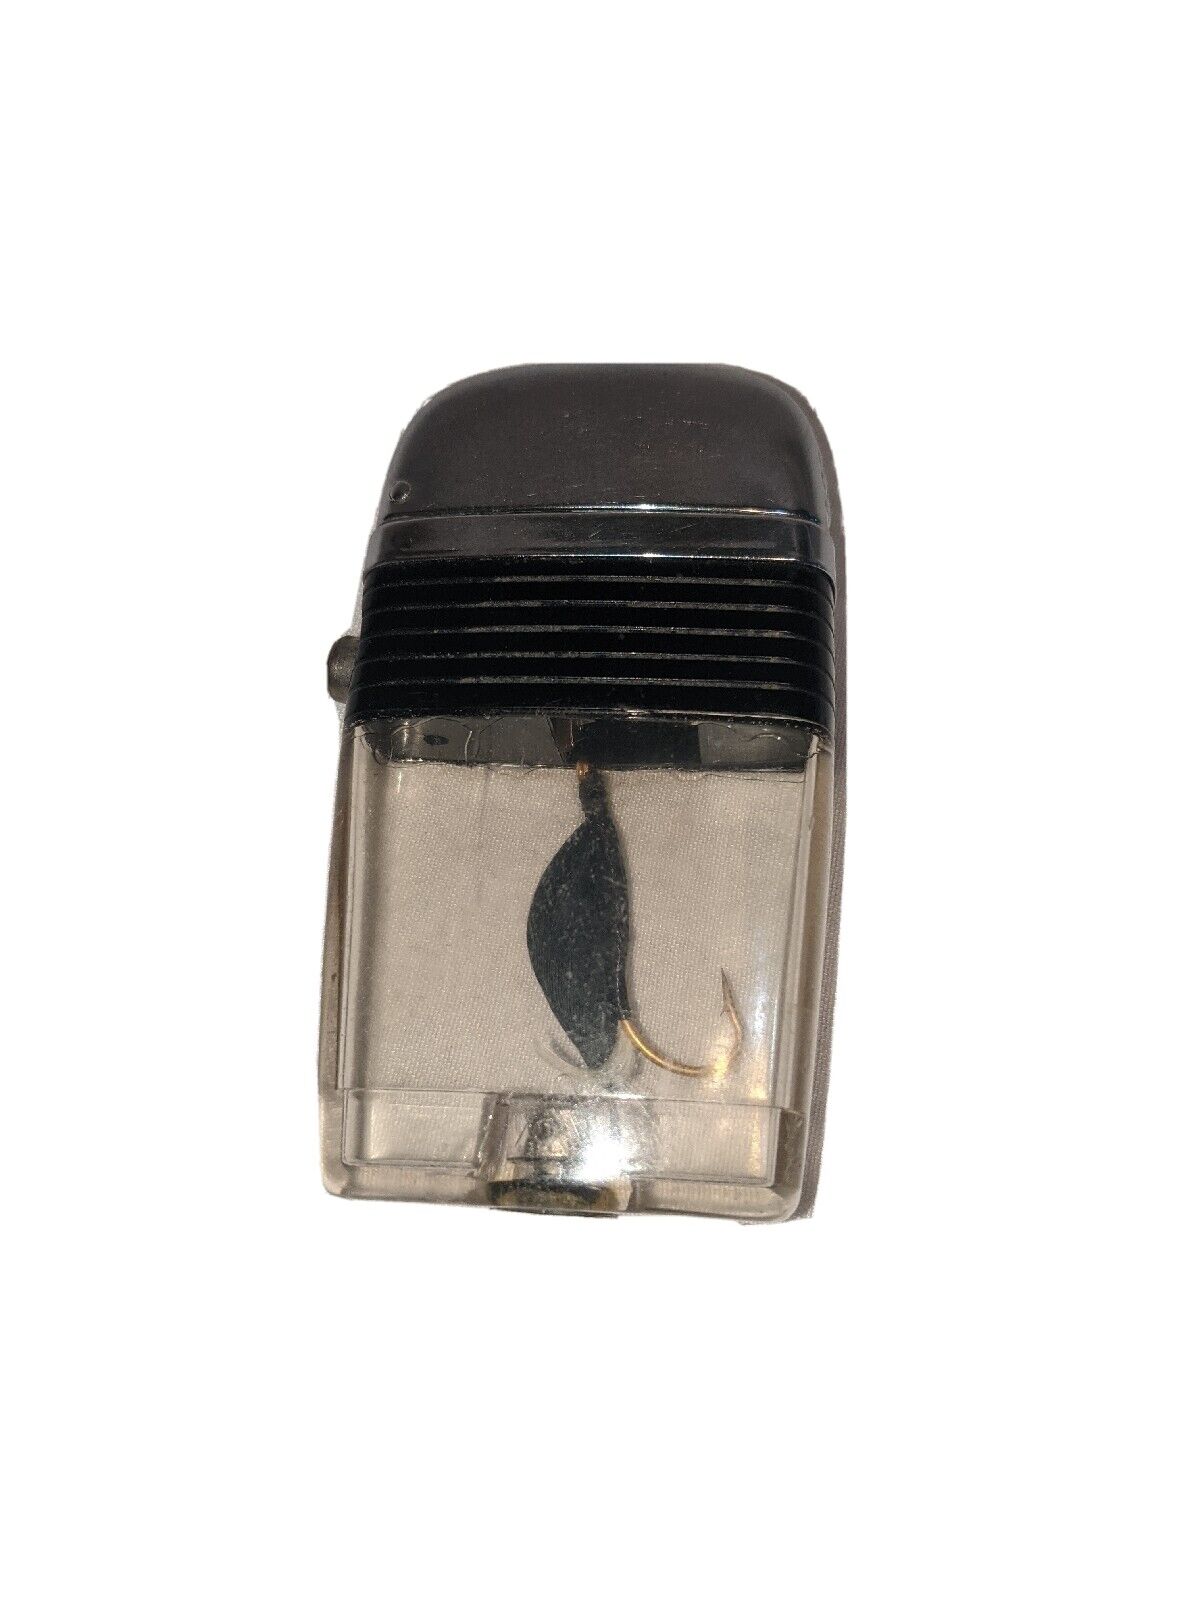 Vintage Scripto VU Lighter with Fishing Fly Black Band 1960s